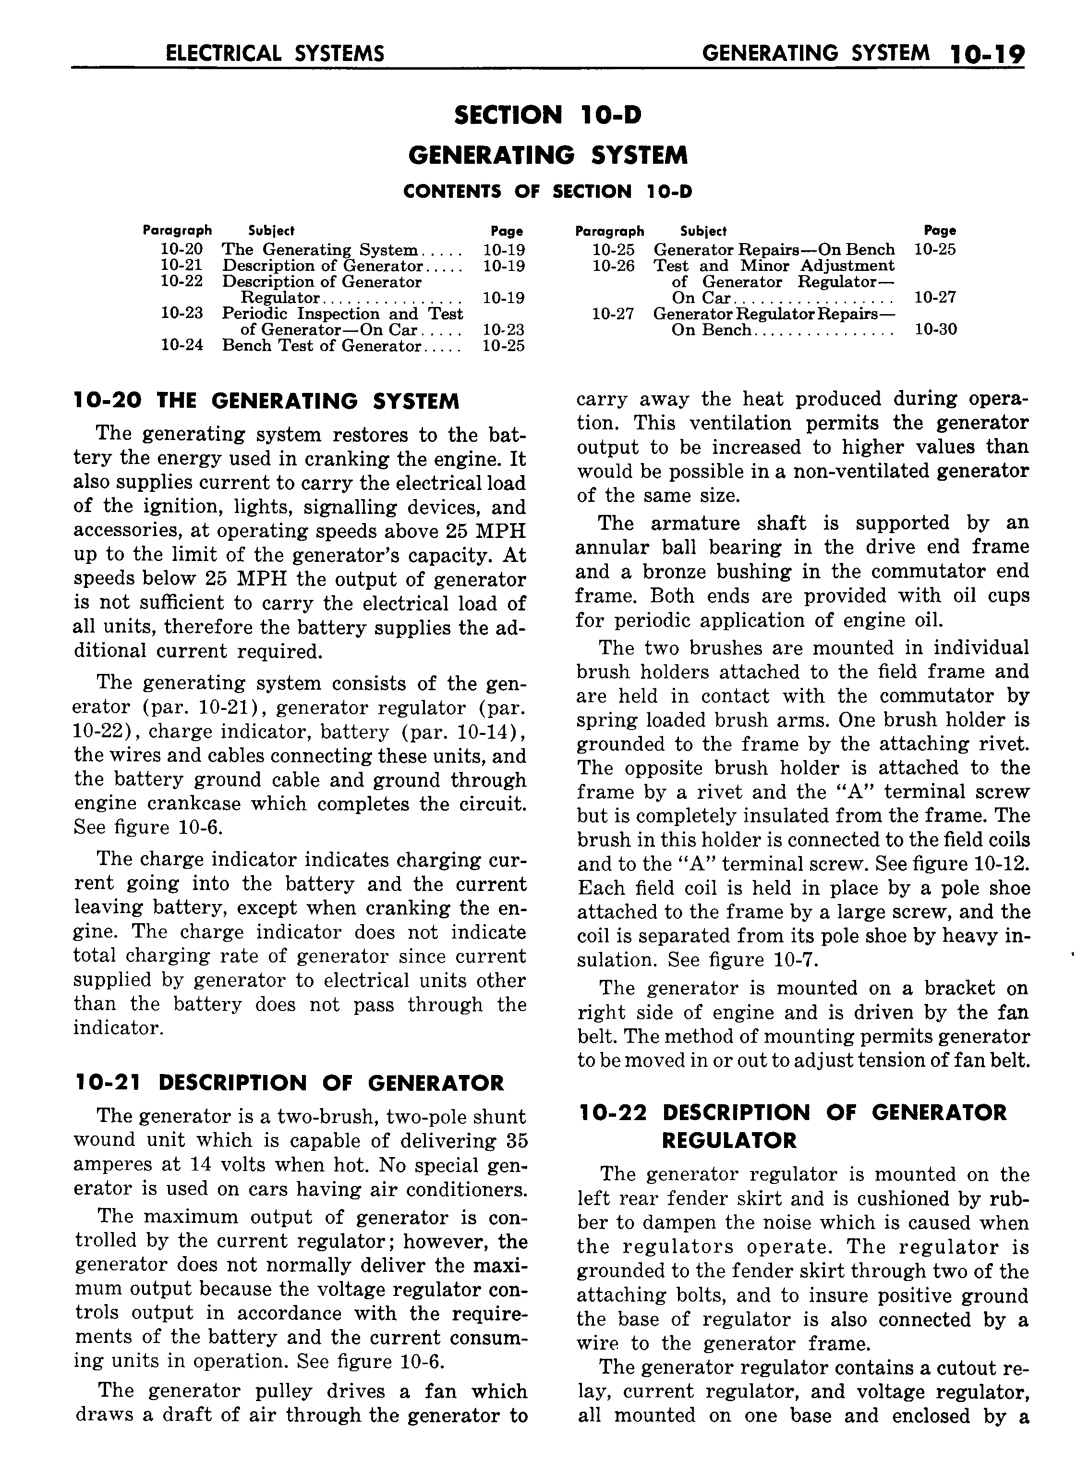 n_11 1957 Buick Shop Manual - Electrical Systems-019-019.jpg